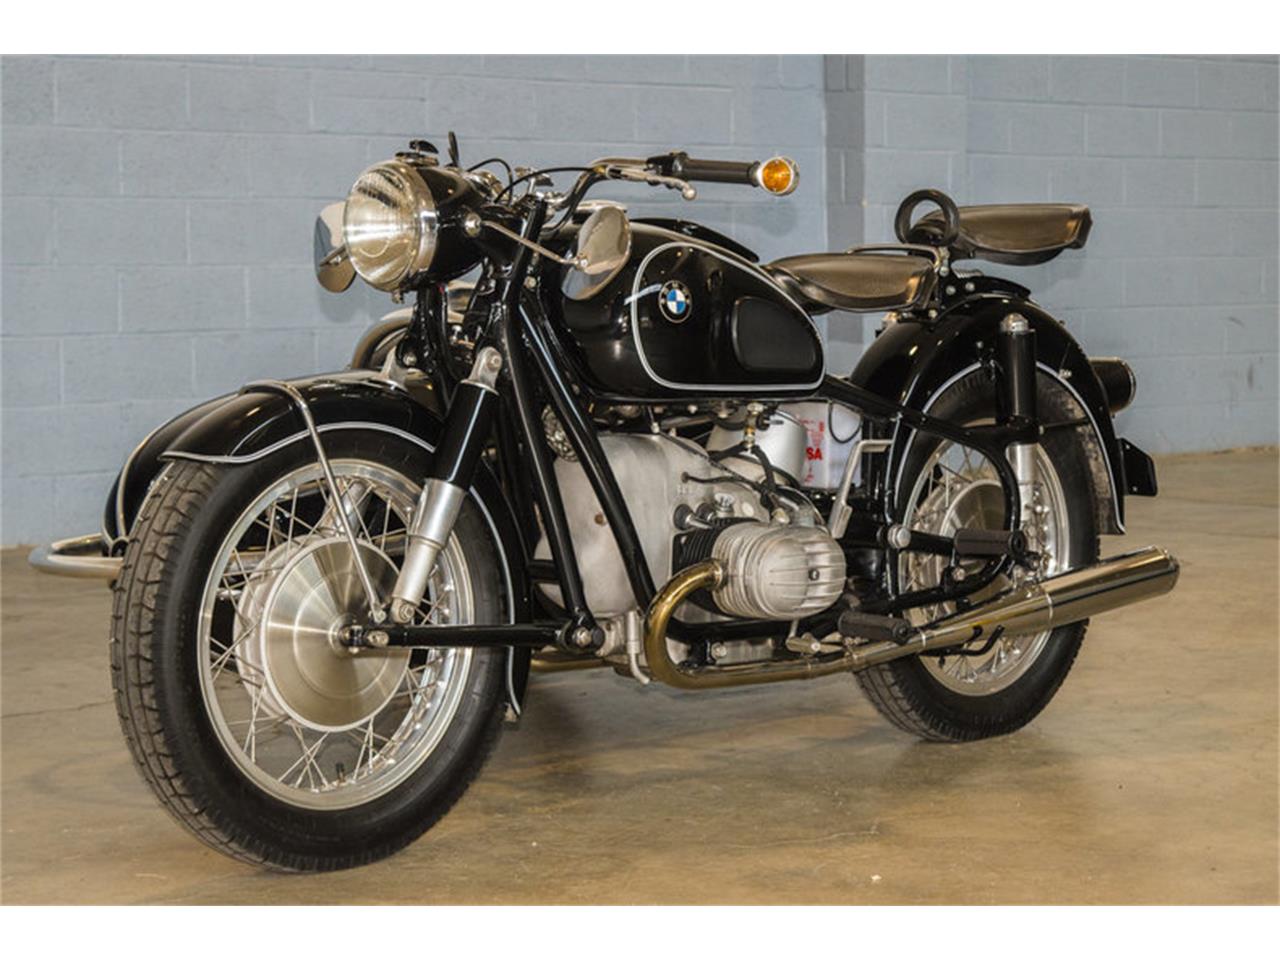 1969 BMW Motorcycle for Sale | ClassicCars.com | CC-1011785